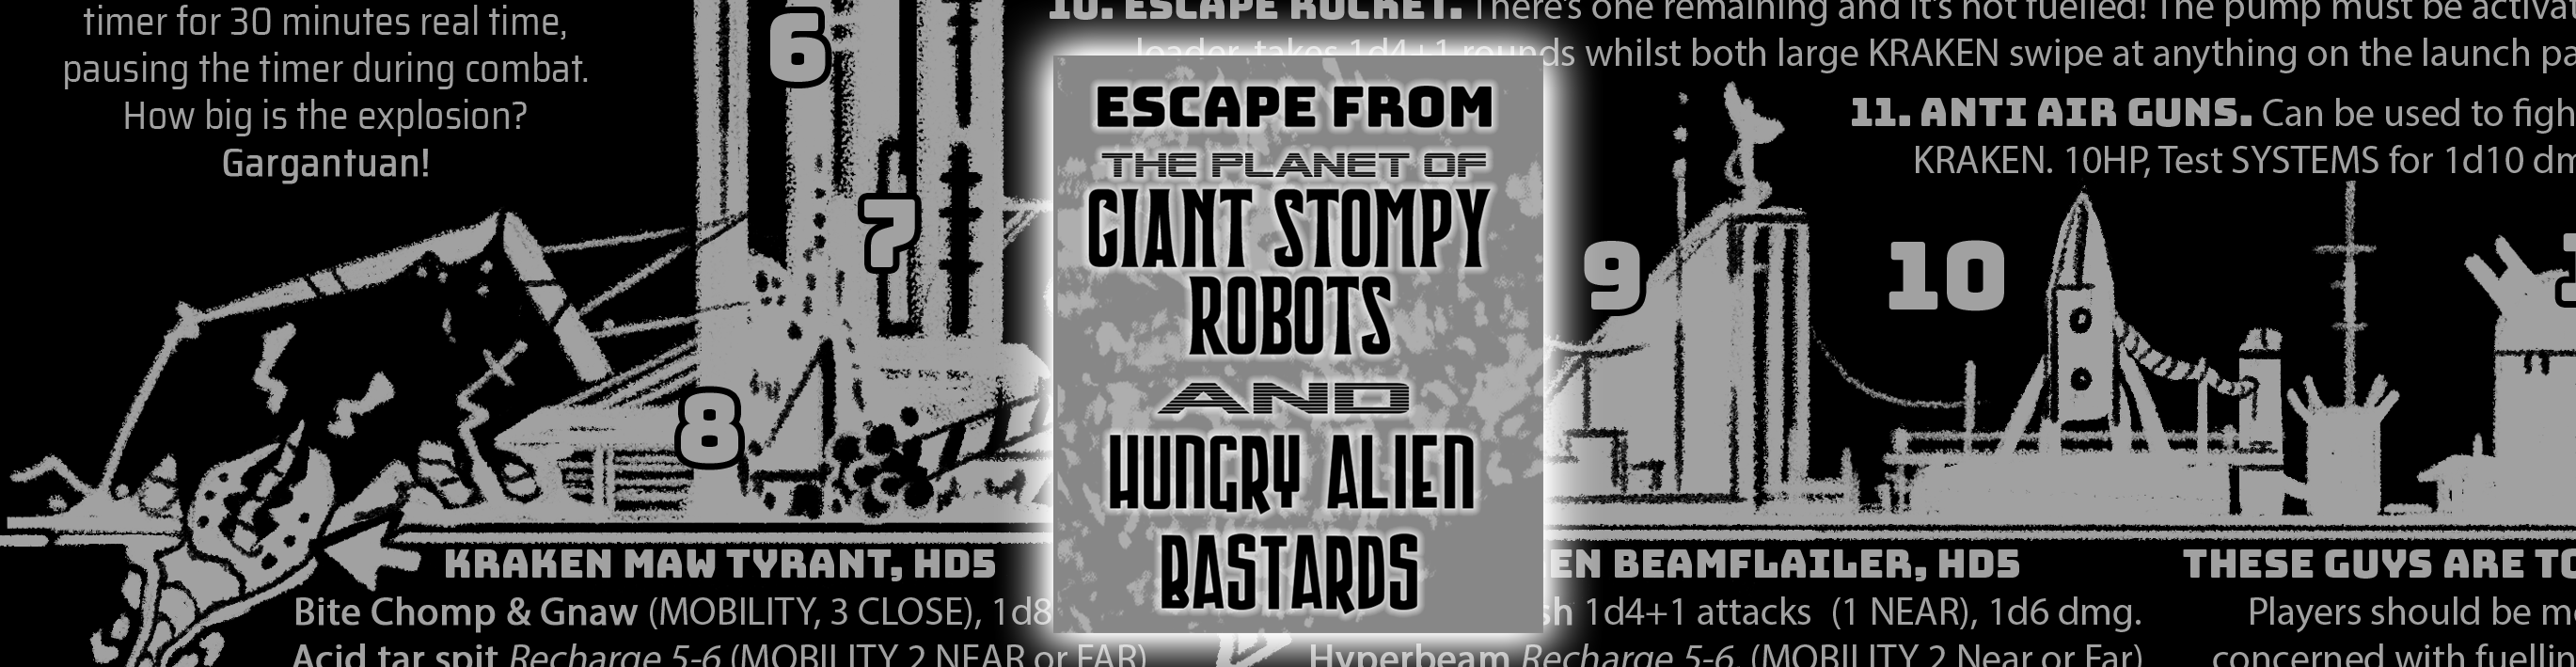 Escape From The Planet of Giant Stompy Robots and Hungry Alien Bastards